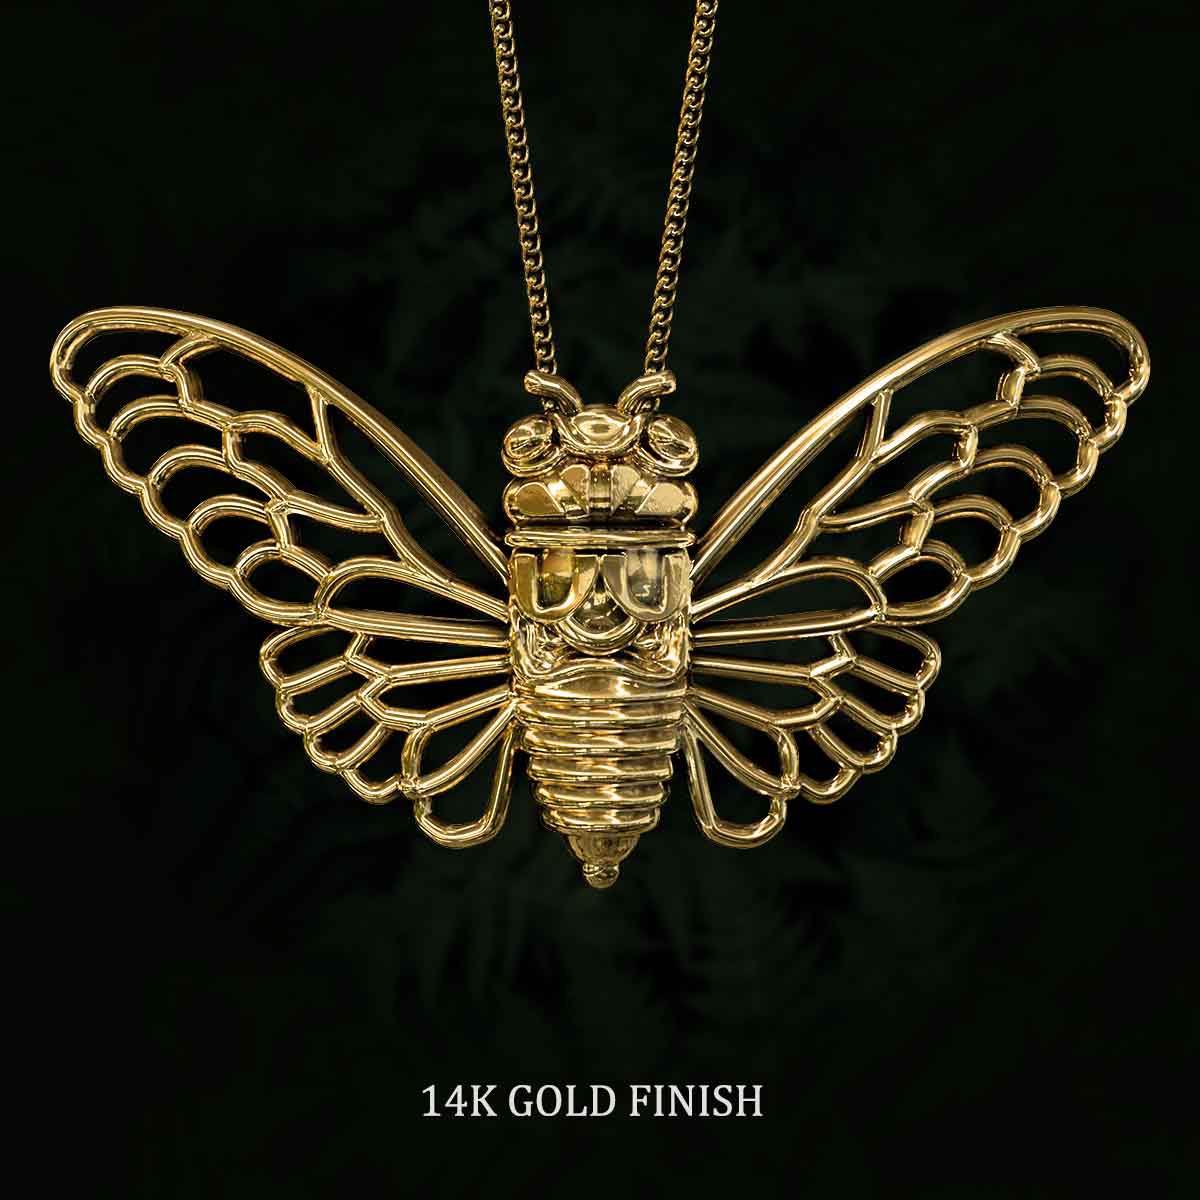 14k-Gold-Finish-Cicada-Pendant-Jewelry-For-Necklace